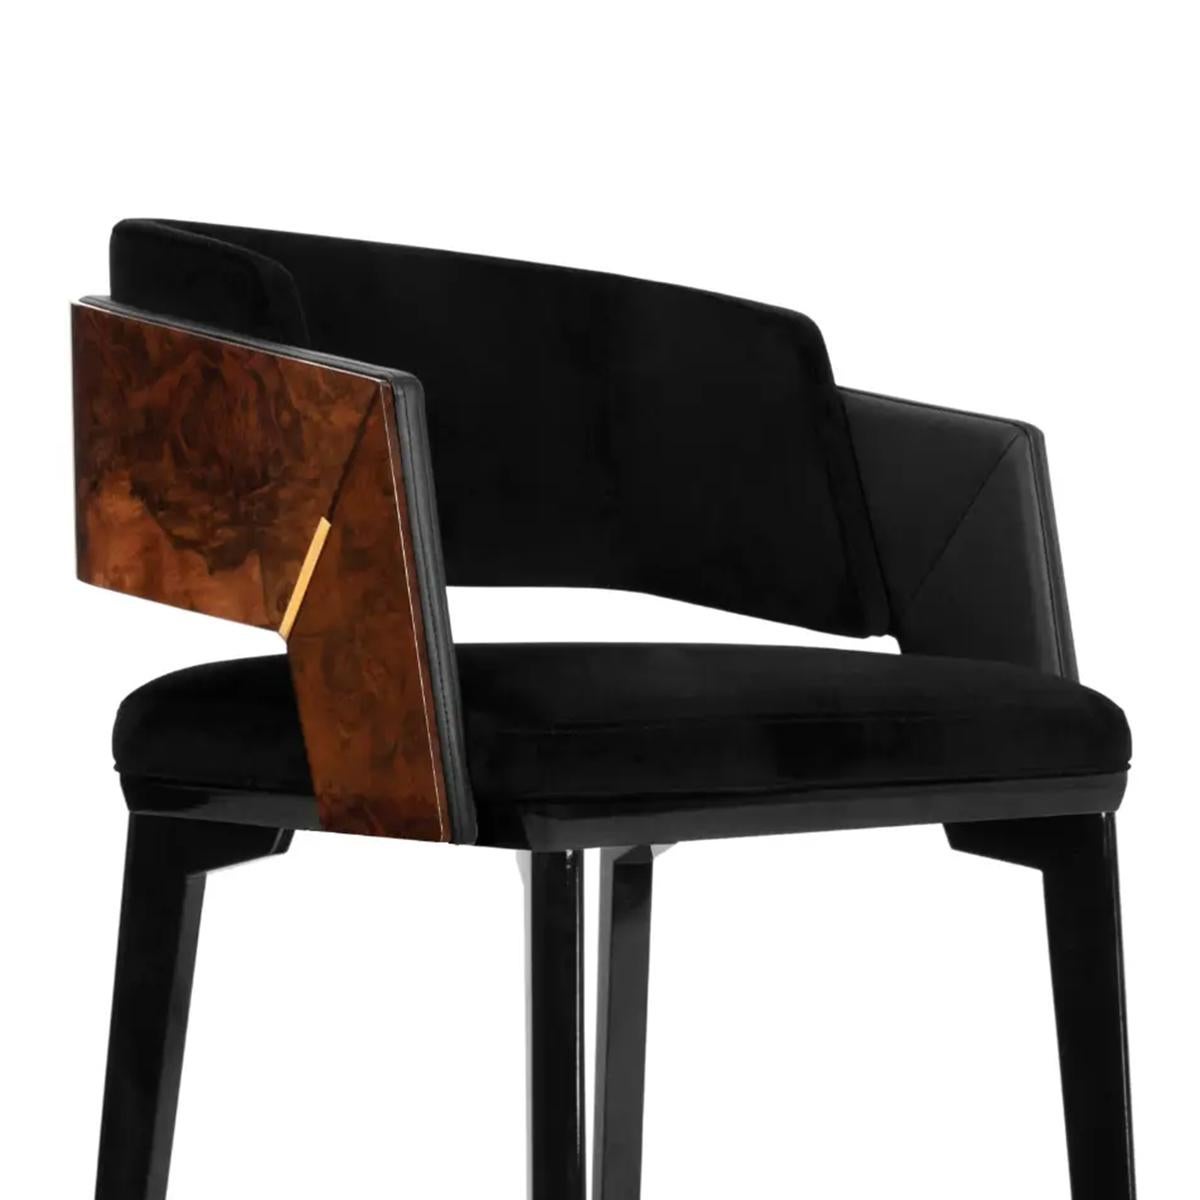 Bar stool Lupus with structure in solid walnut,
seat and back upholstered and covered with
black velvet fabric, inside armrests covered with
black genuine leather and outside armrests and 
back covered with varnished walnut root. Details
and